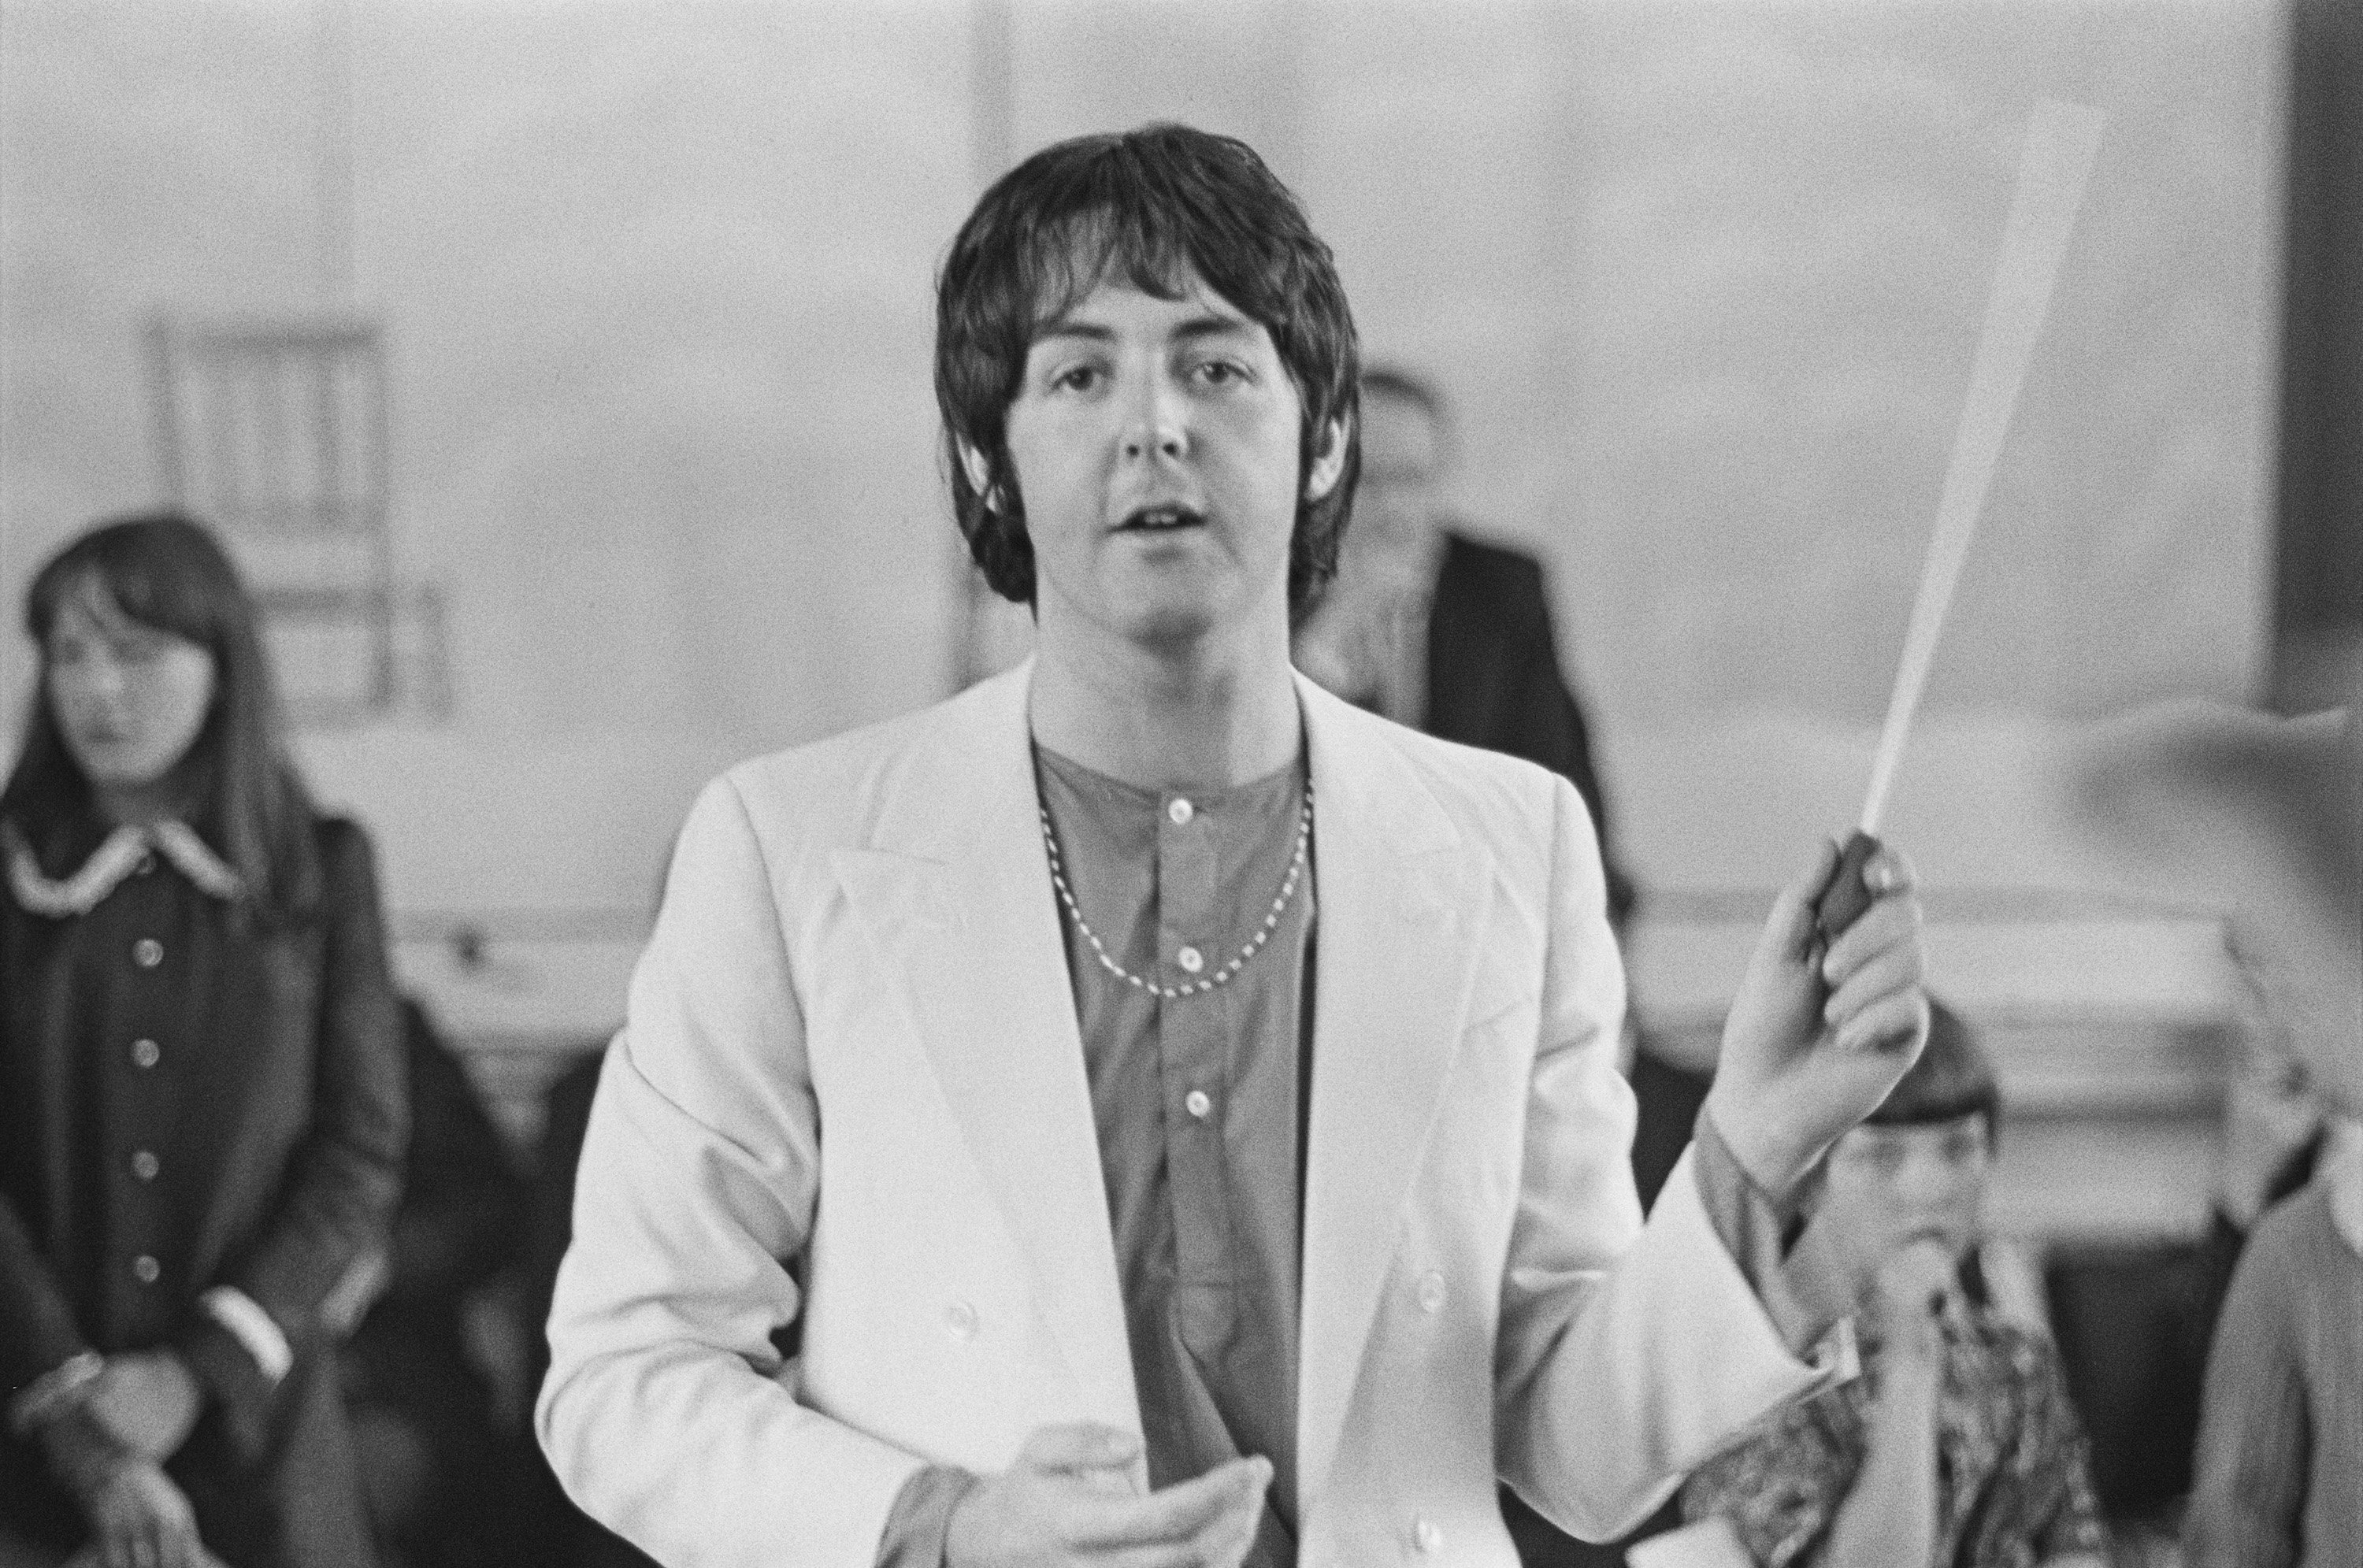 English musician, singer, songwriter, and composer Paul McCartney records the Lennon-McCartney composition 'Thingumybob' with the Black Dyke Mills Band